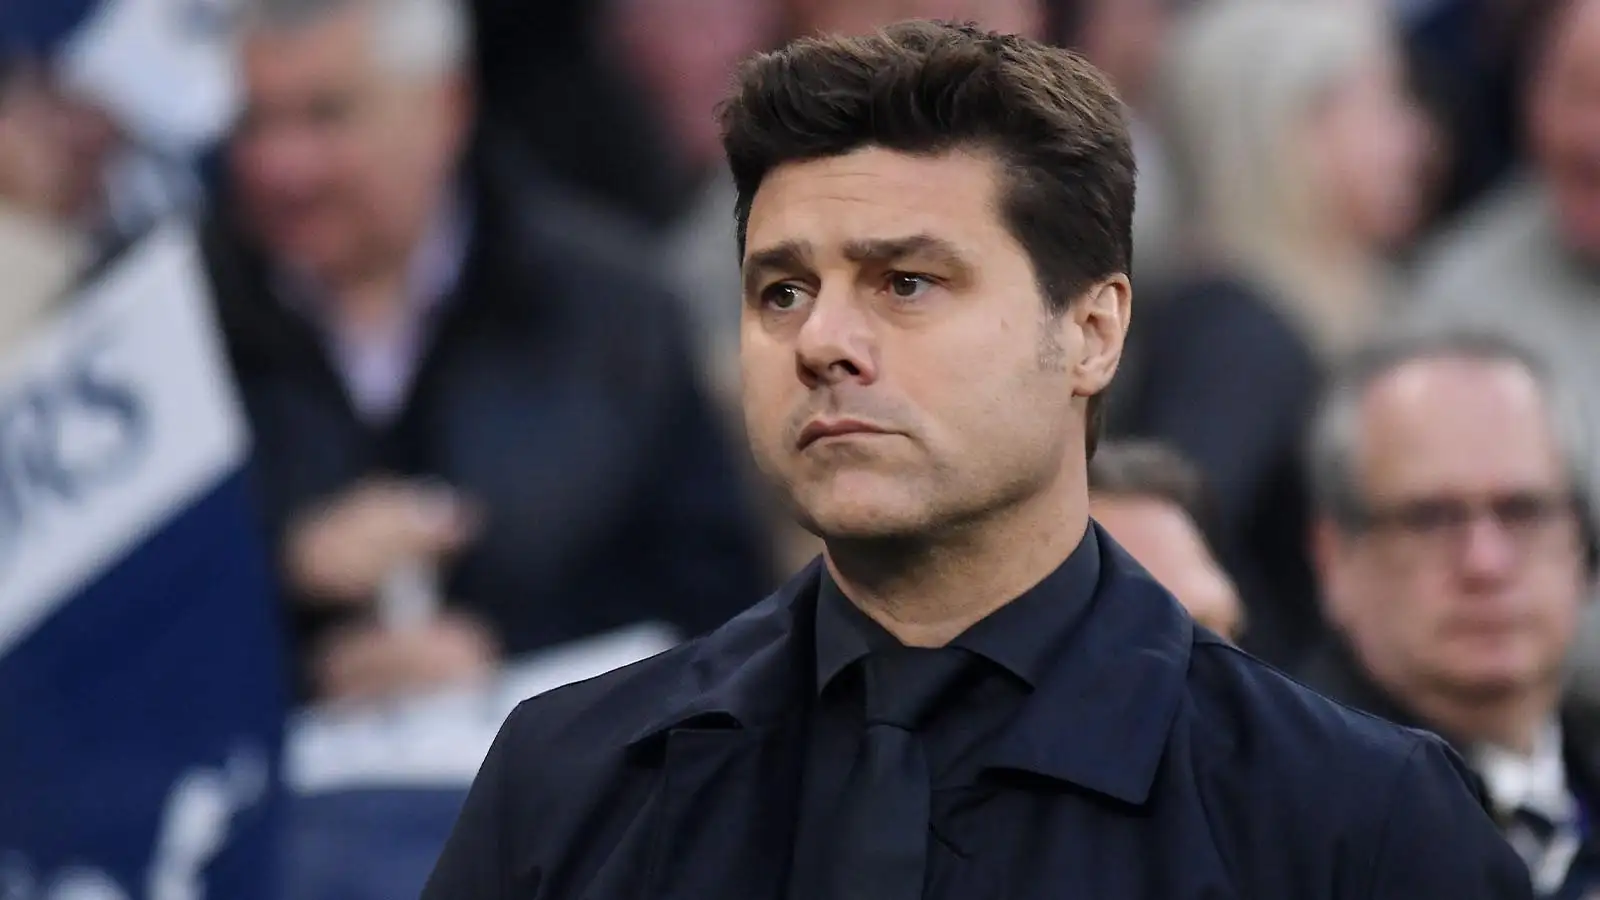 LONDON, ENGLAND - APRIL 30, 2019: Tottenham manager Mauricio Pochettino pictured prior to the first leg of the 2018/19 UEFA Champions League Semi-finals game between Tottenham Hotspur (England) and AFC Ajax (Netherlands) at Tottenham Hotspur Stadium